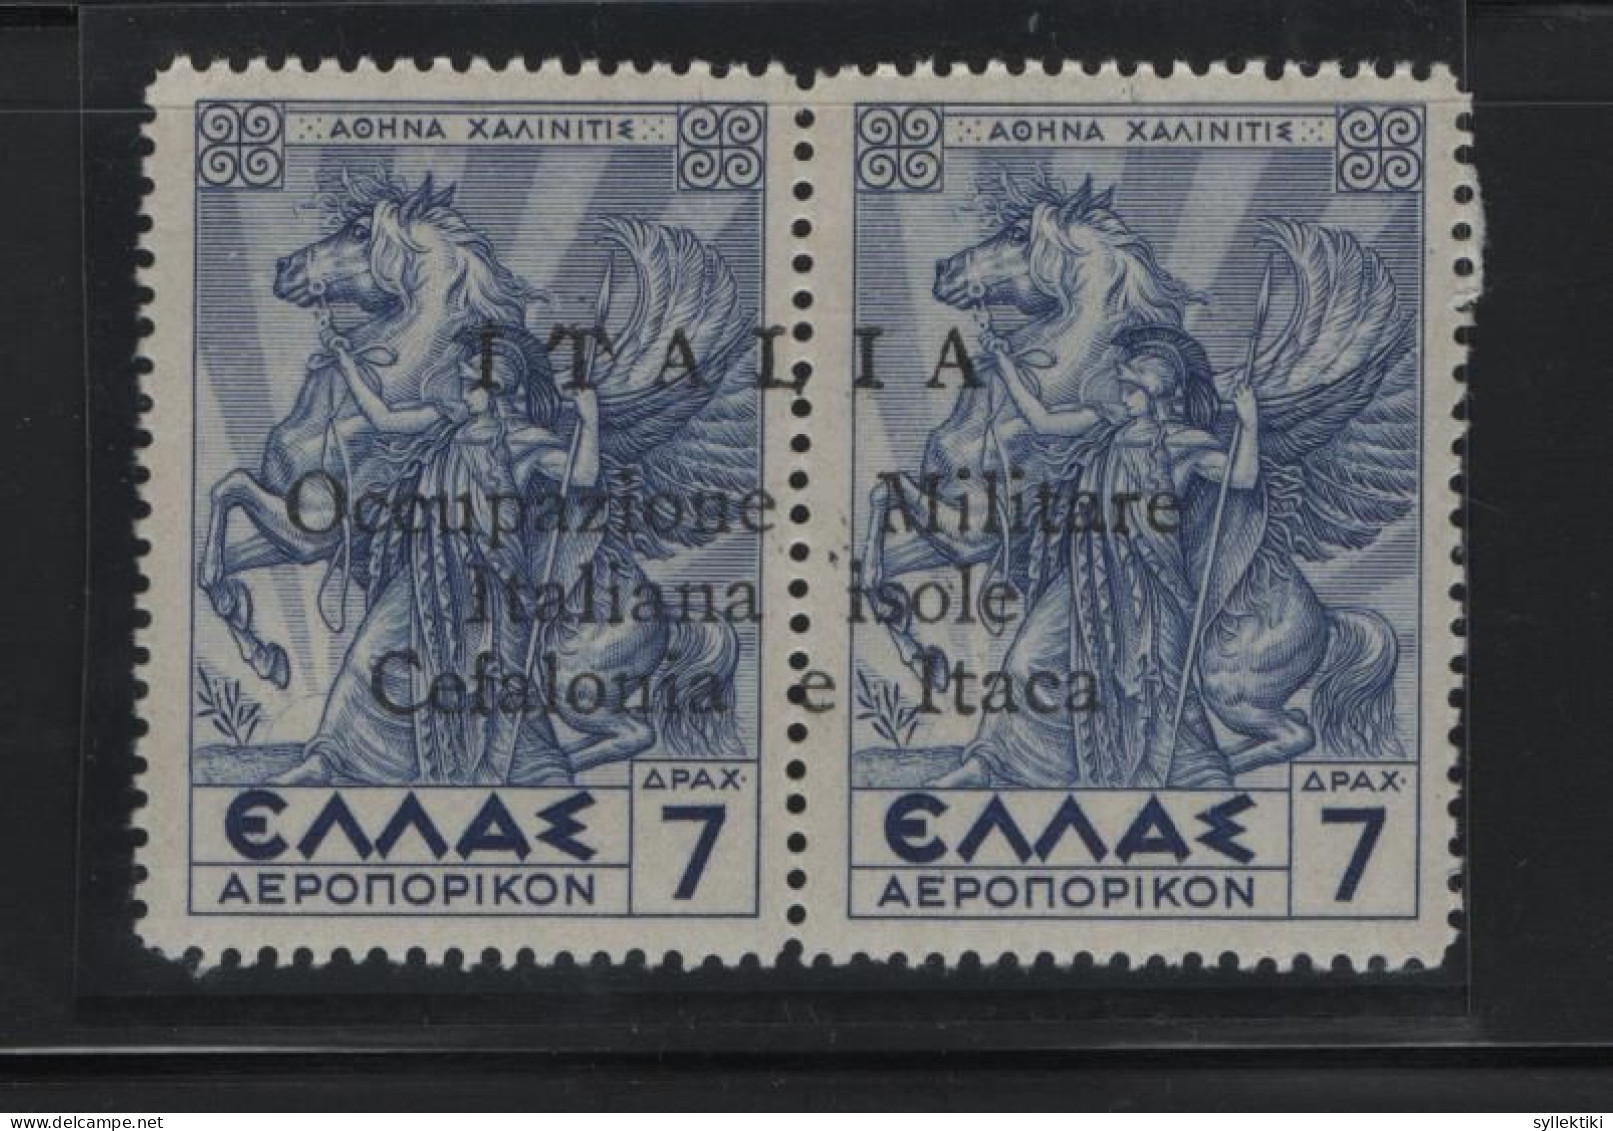 GREECE IONIAN ISLANDS 1941 7+7 DRACHMAS PAIR MNH STAMPS MYTHOLOGICAL ISSUE OVERPRINTED ITALIA Occupazione Militare Itali - Ionian Islands